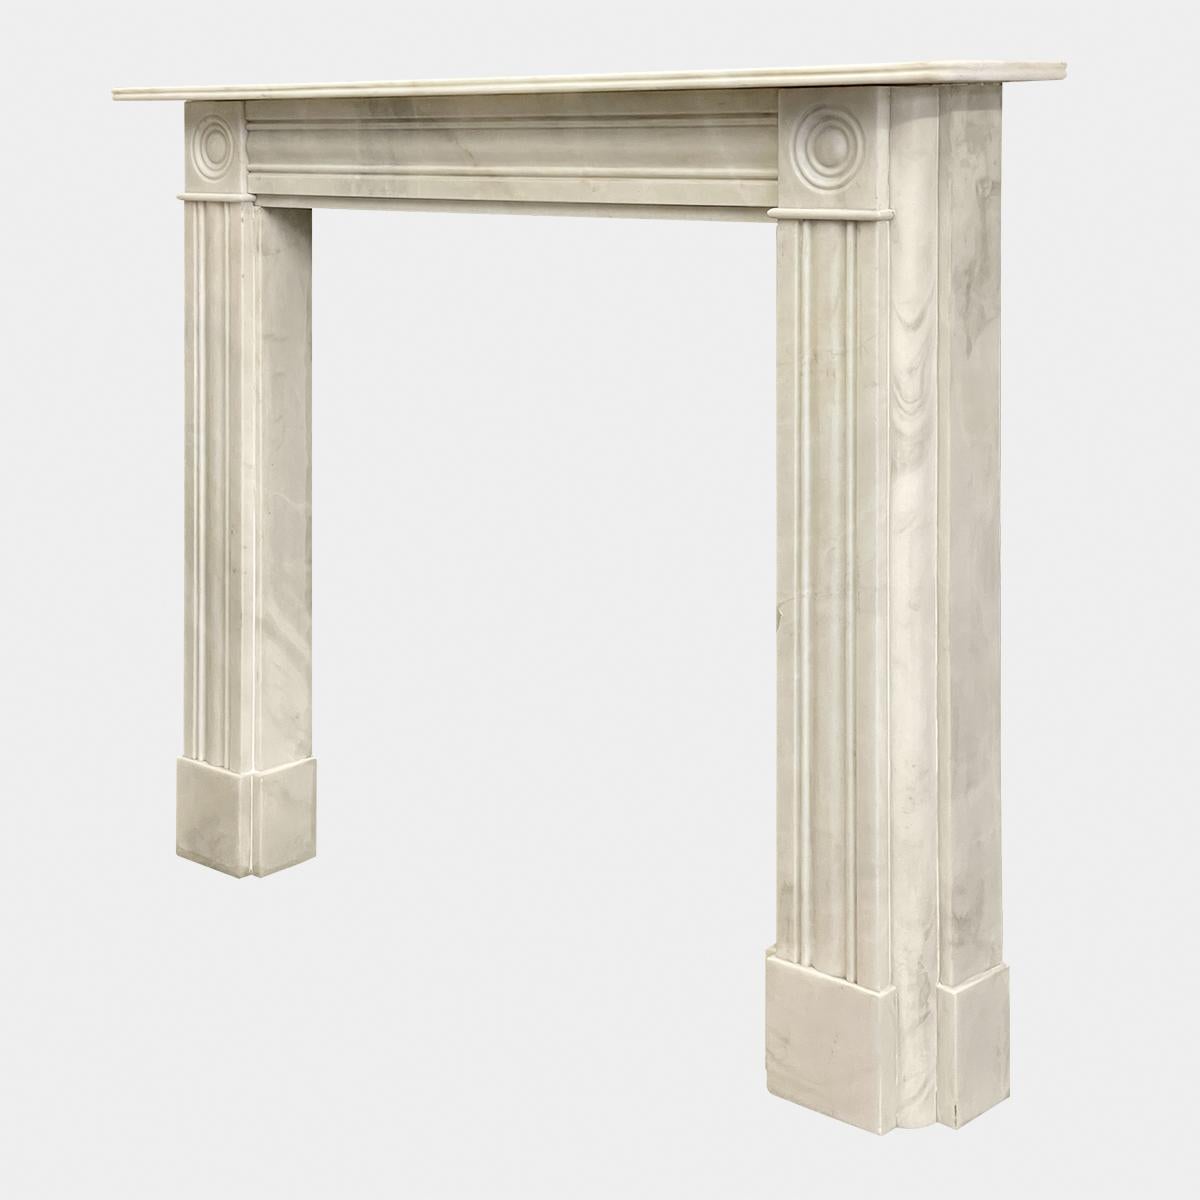 An English Regency style fireplace made in Rosa Aurora marble. Reclaimed from a Mayfair property in London. Typical early 19th century style with cushion mouldings to jambs and frieze, carved roundel corner blocks and a reeded shelf.
Images are a